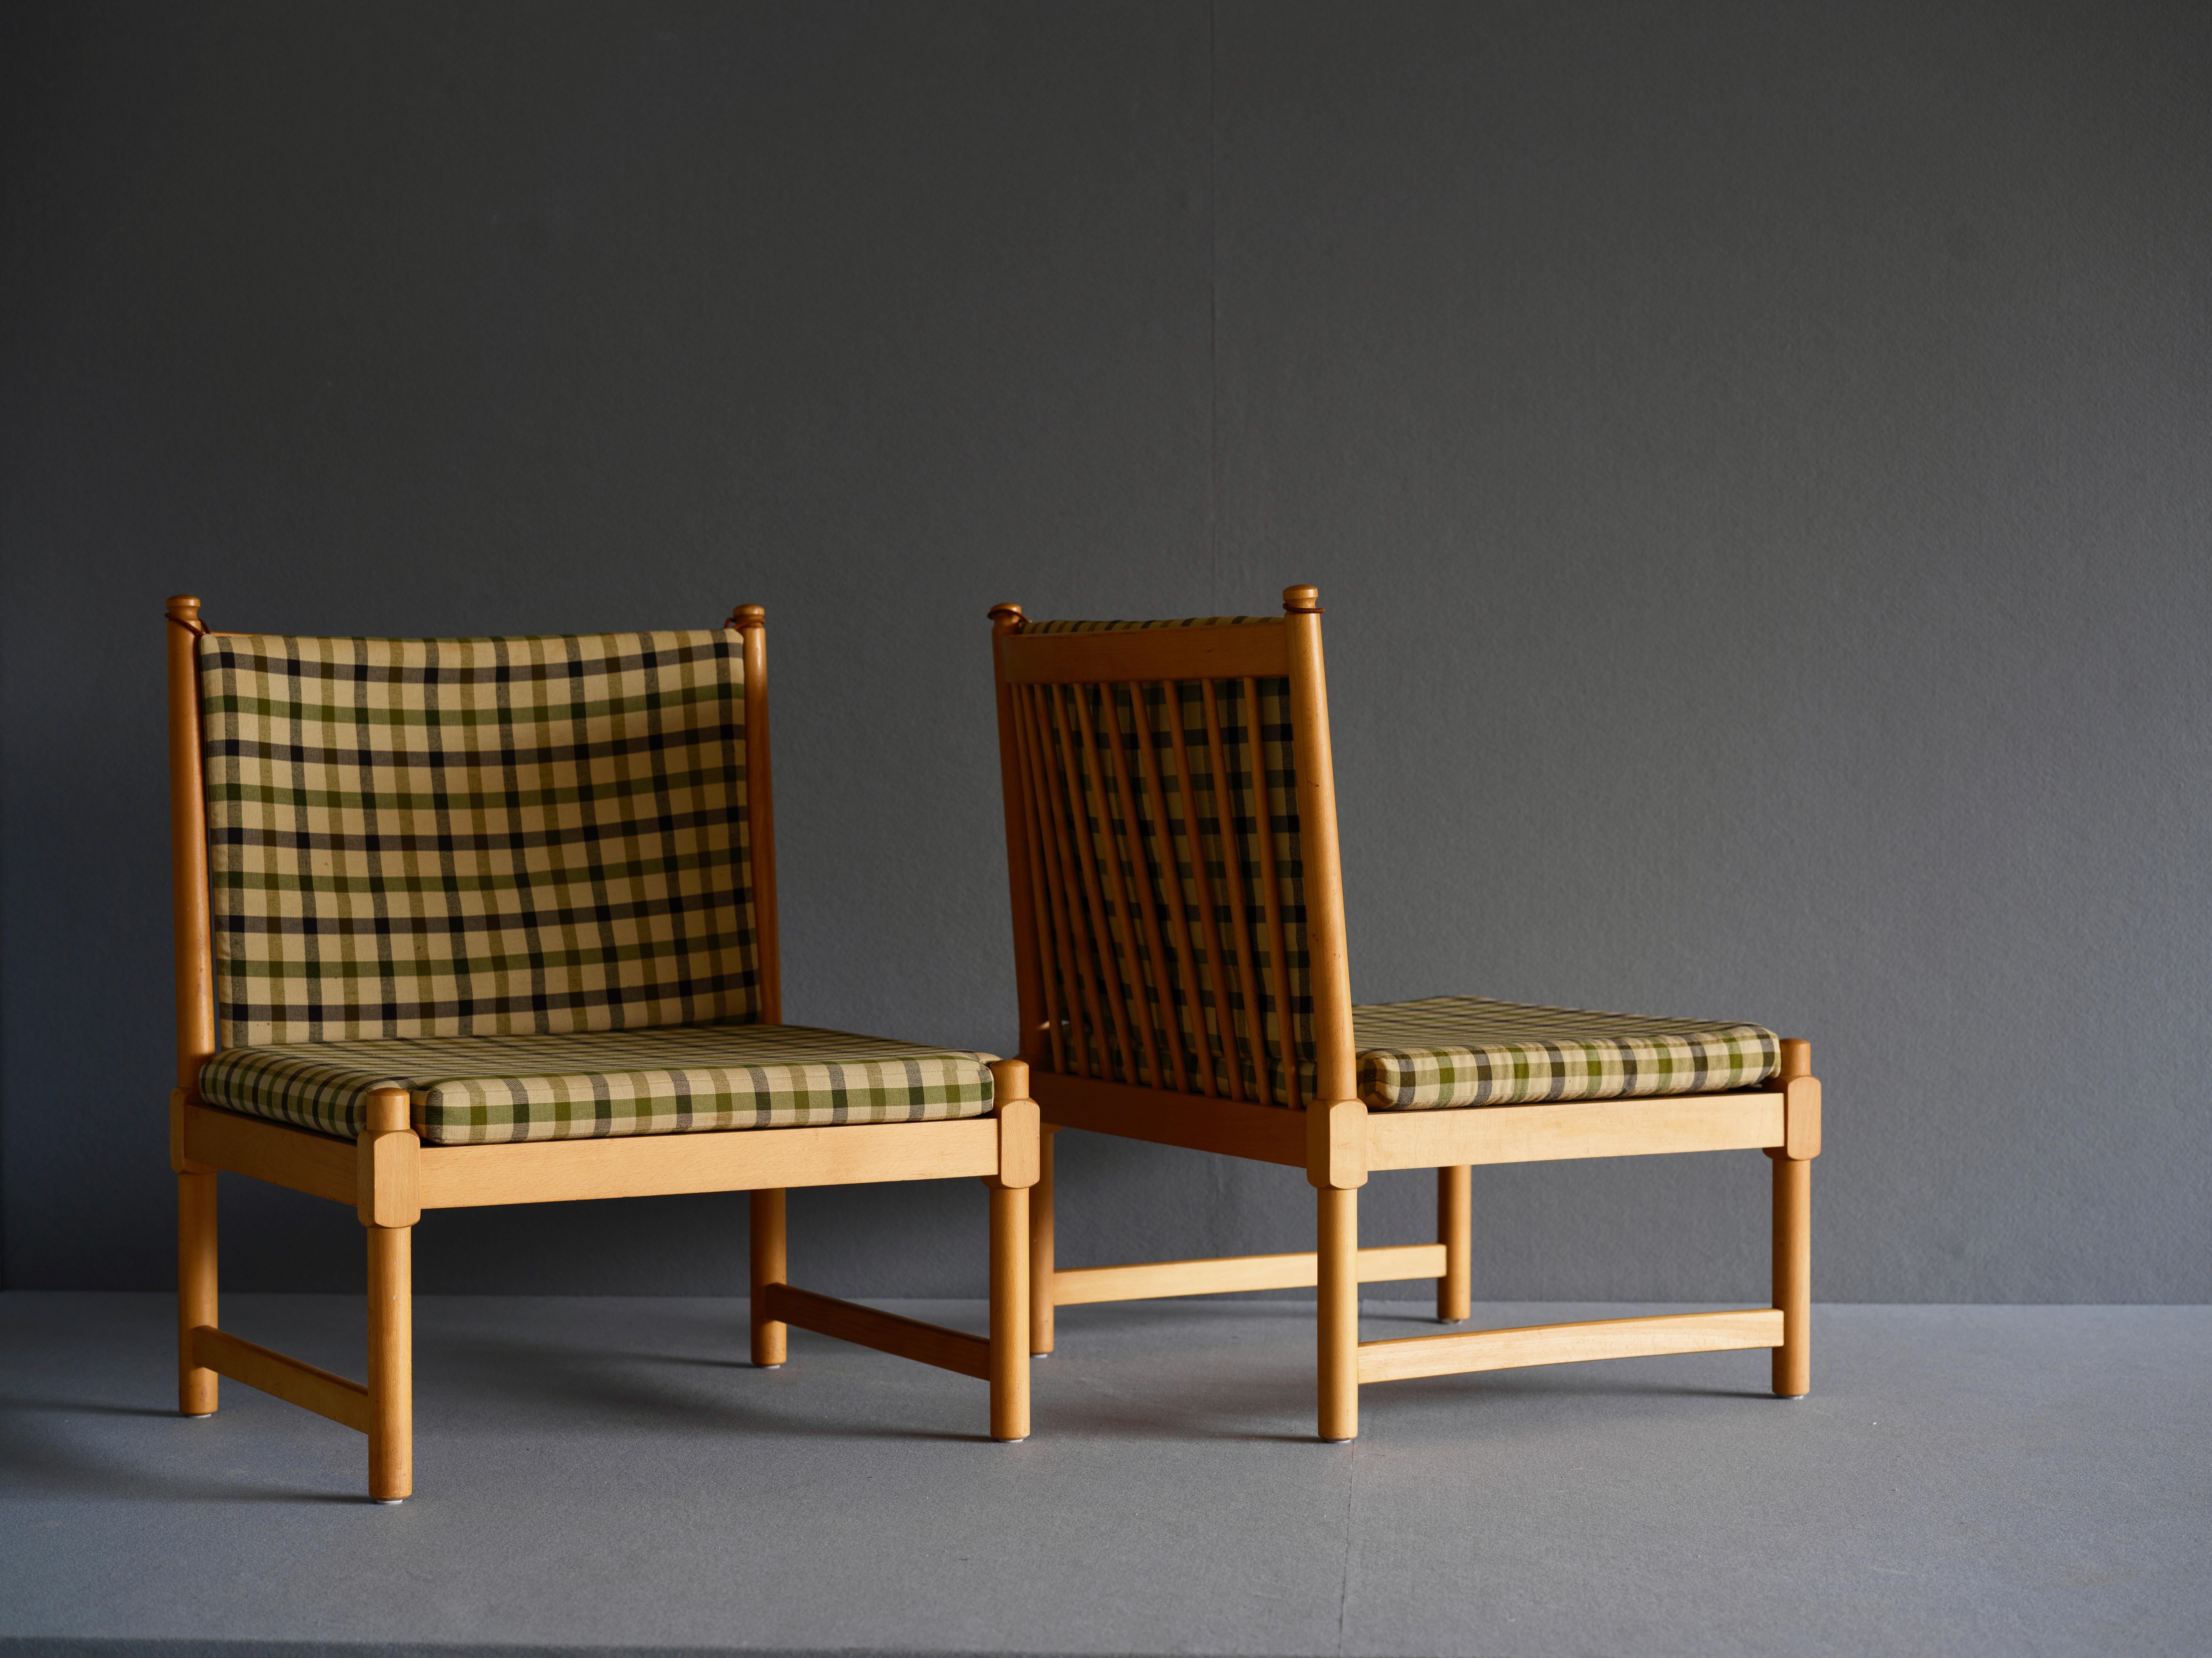 A matching pair of lounge chairs with matching ottoman by Borge Mogensen for Frtiz Hansen. This set in in beech and is upholstered in wool. The original label remains. Circa 1966.

This set was part of the private collection from the estate of